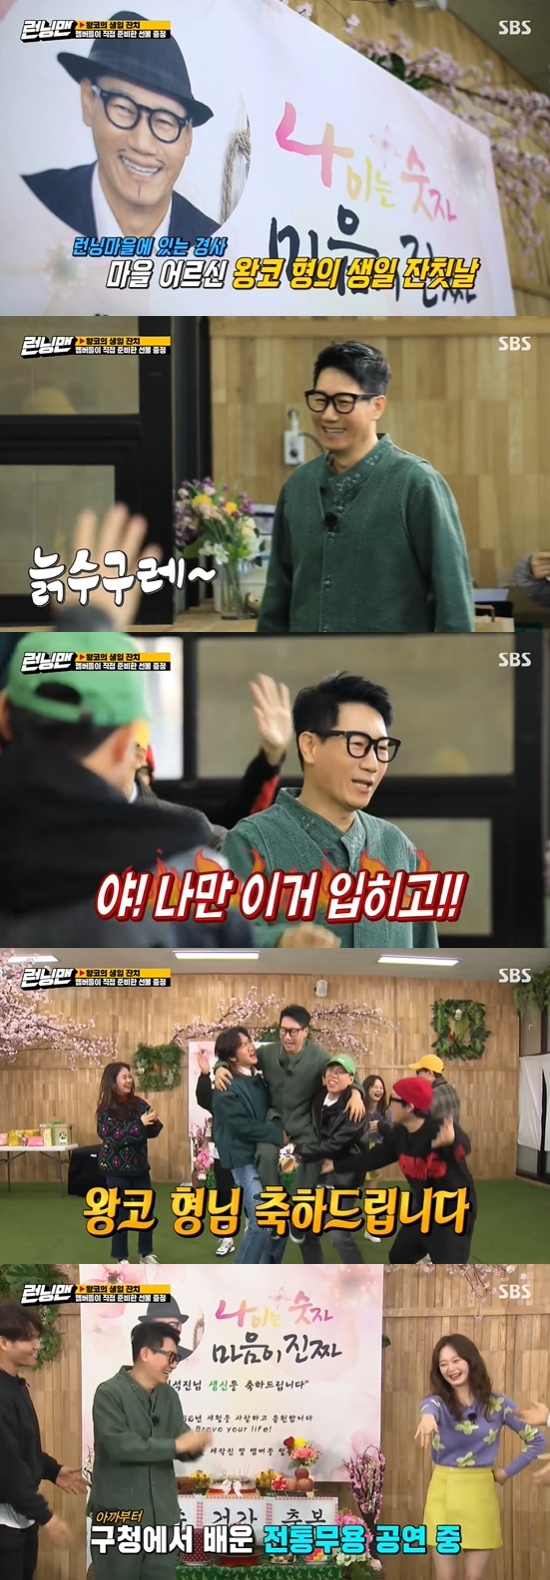 Running Man Ji Suk-jin laughed when he saw the members birthday presents.On the 28th SBS Good Sunday - Running Man, Ji Suk-jins birthday feast was held.Members were surprised to see Ji Suk-jins birthday prize, Lee Kwang-soo said, I was surprised to know that there was something bad.Yoo Jae-Suk said, The age is number, the mind is real. He said, The mind should change the number and the age really.Members prepared gifts for Ji Suk-jin, who said: Seok Jin-yi doesnt like gifts much, and he likes to give hope.For example, stock information, and Kim Jong-kook said, Or introduce a rich brother. The members were residents in the running village, and it was the birthday of the villages elder, Ji Suk-jin, actually the birthday of Ji Suk-jin, a day after the recording day.Ji Suk-jin, who appeared, complained, I thought I was wearing this, but the members did not care, but emphasized the health of Ji Suk-jins birthday.Ji Suk-jin, who saw his picture, said, I have a picture taken this time.Yoo Jae-Suk, who saw the phrase Bravo Yul Life, laughed when he said, Lets shout out, Zirabo.It is the oldest Variety, said Yoo Jae-Suk. There are few people who are Variety in their 60s life.Jeon So-min showed a dance performance for Ji Suk-jin, and Ji Suk-jin learned the charm of the classics, saying, I did not know why older seniors liked classical music, but it gets better.The members then took out the gifts prepared for Ji Suk-jin.Jeon So-min handed over the dead lady, and Ji Suk-jin laughed, saying, I have a wife.Yoo Jae-Suk prepared the gateball for the home-beater Ji Suk-jin, who said: This is not the age to do this.I do a powerful thing, but Yoo Jae-Suk did not care.Kim Jong-kooks gift was a protein for the elderly.Song Ji-hyo prepared a scalp care shampoo and Lee Kwang-soo prepared Soap Bubbles for use in increasing lung capacity.Ji Suk-jin said, Are you worried enough for me to do this? but blew Soap Bubbles.Yang presented a mission bag and handed it a luxury box saying, Its a joke, this is real. Ji Suk-jin could not hide his smile, saying, I do not like luxury goods.But it was rubber gods that came out, and Ji Suk-jin threw rubber gods; Yoo Jae-Suk said, This is K - Ug, and that it matches Ji Suk-jins costume.The last was a gift from Haha: a one-man sofa, a drawing book, and a painter hat; Ji Suk-jin also hit a gateball presented by Yoo Jae-Suk.Photo = SBS Broadcasting Screen